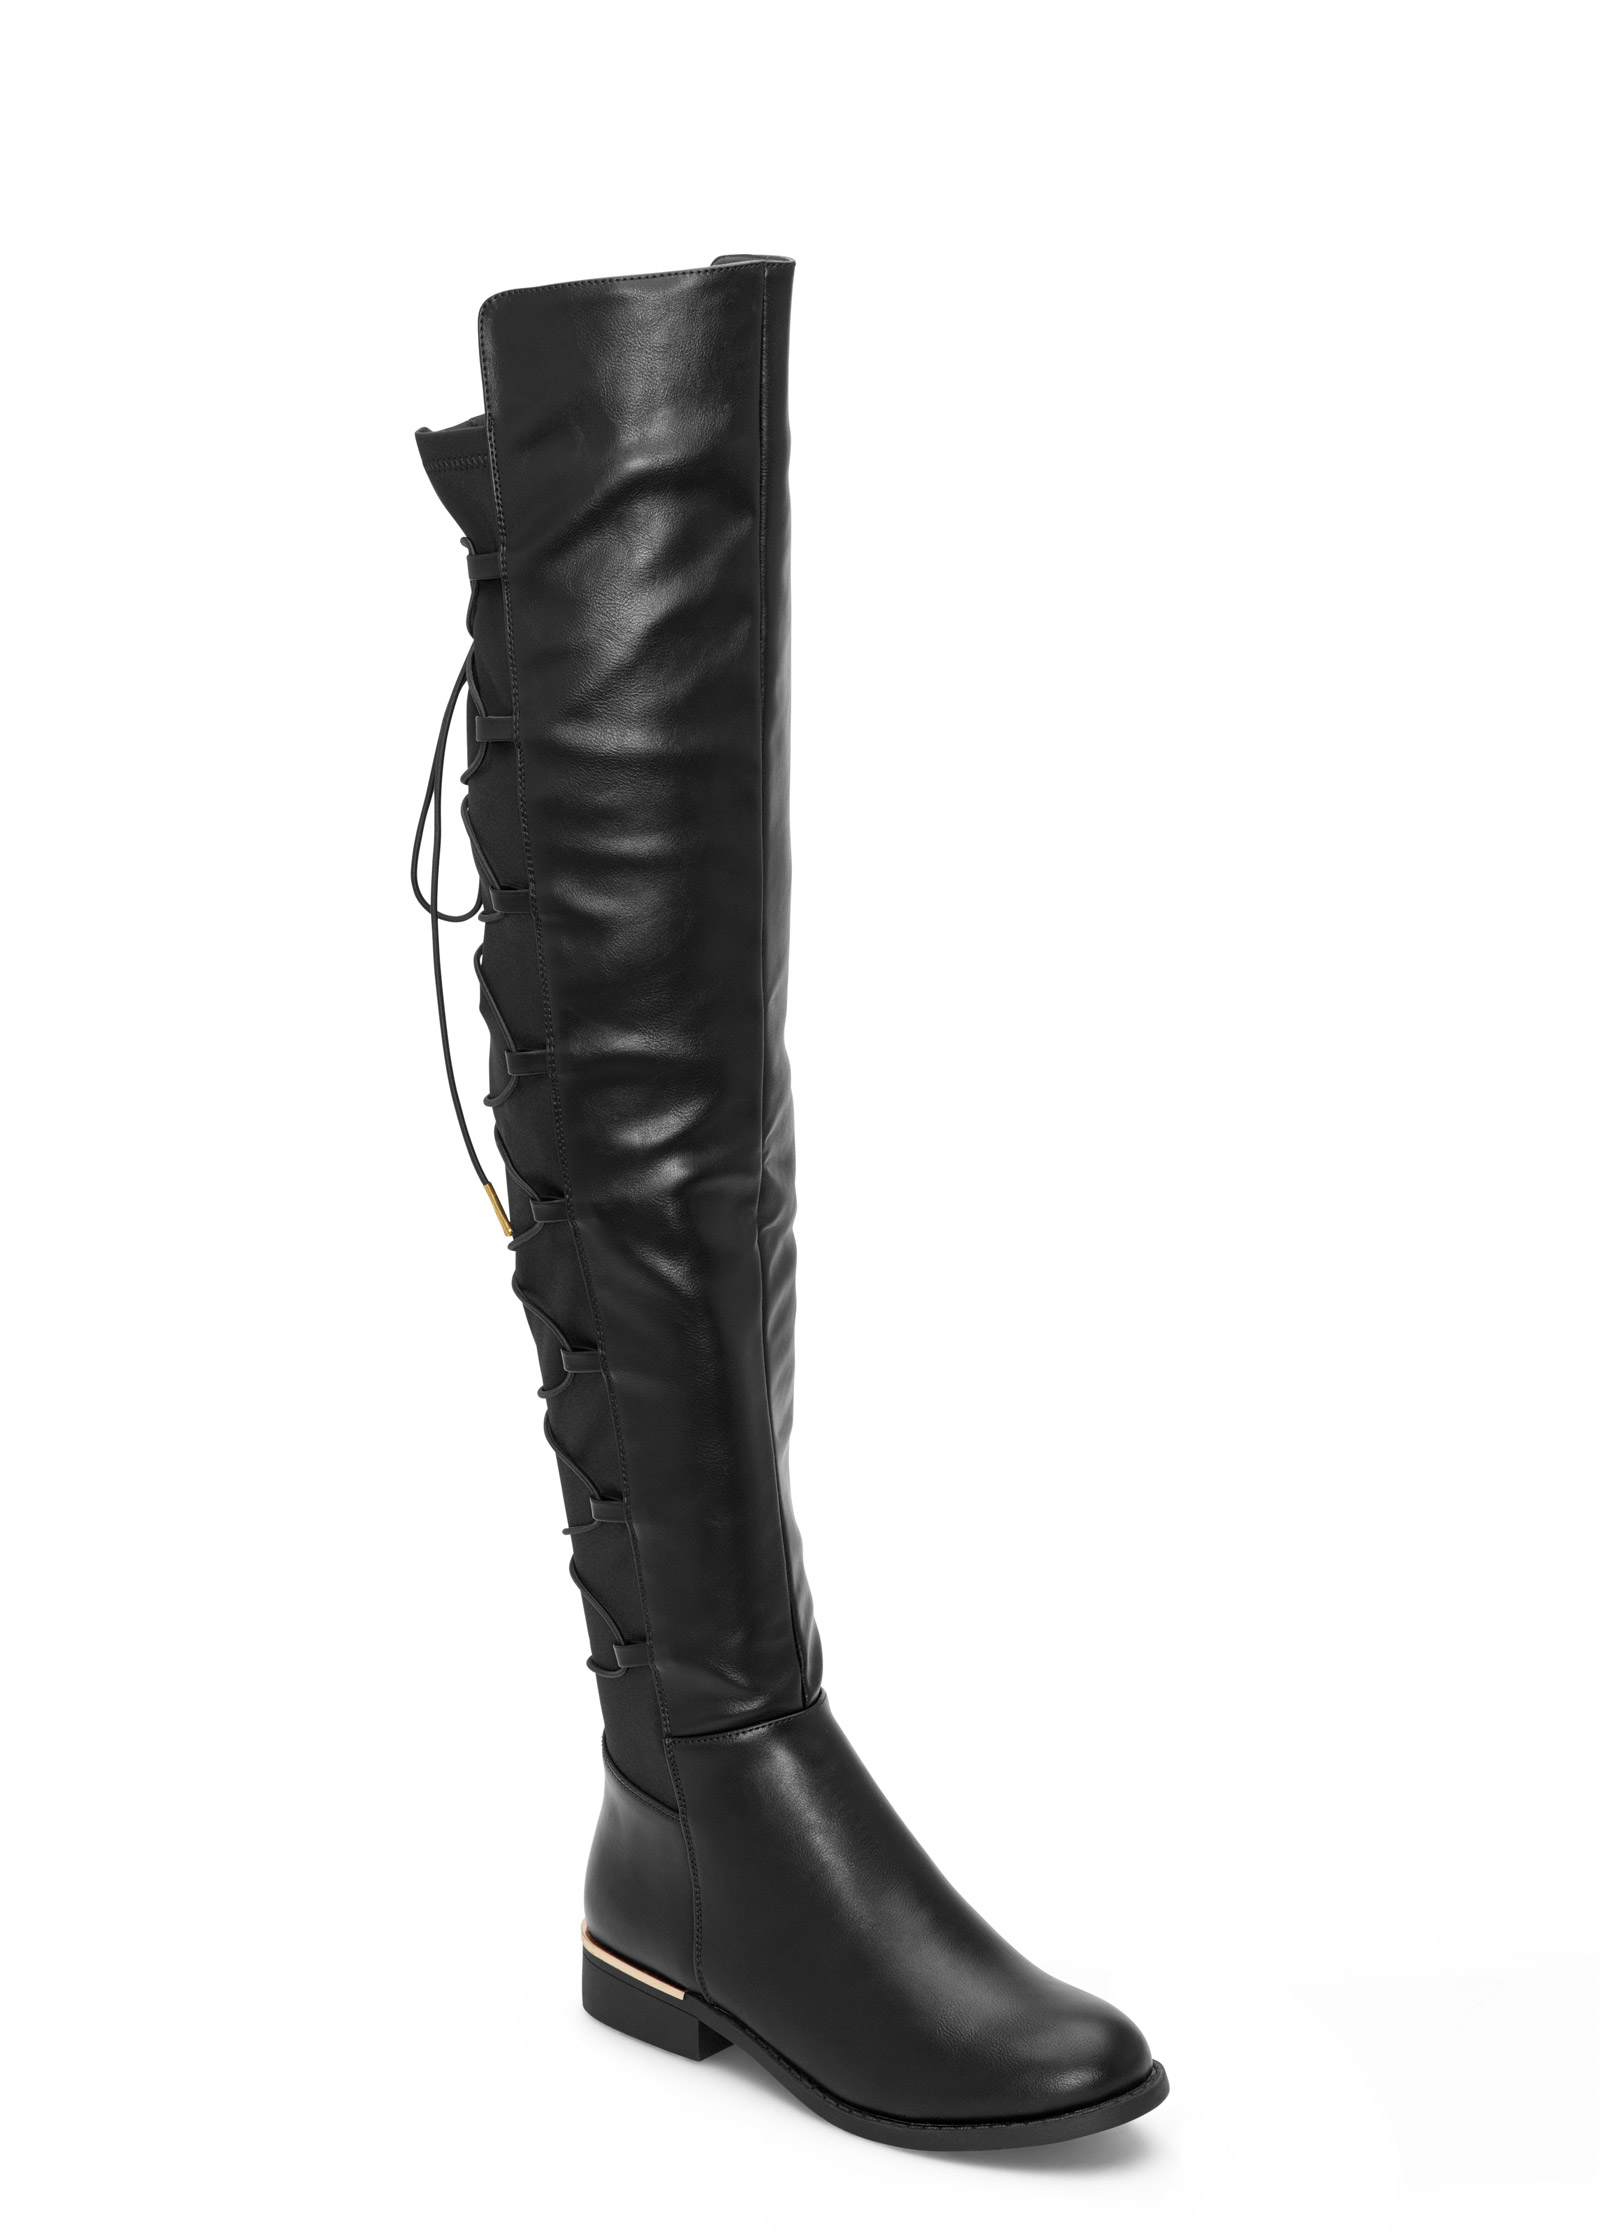 Lace Up Back Detail Boots in Black | VENUS